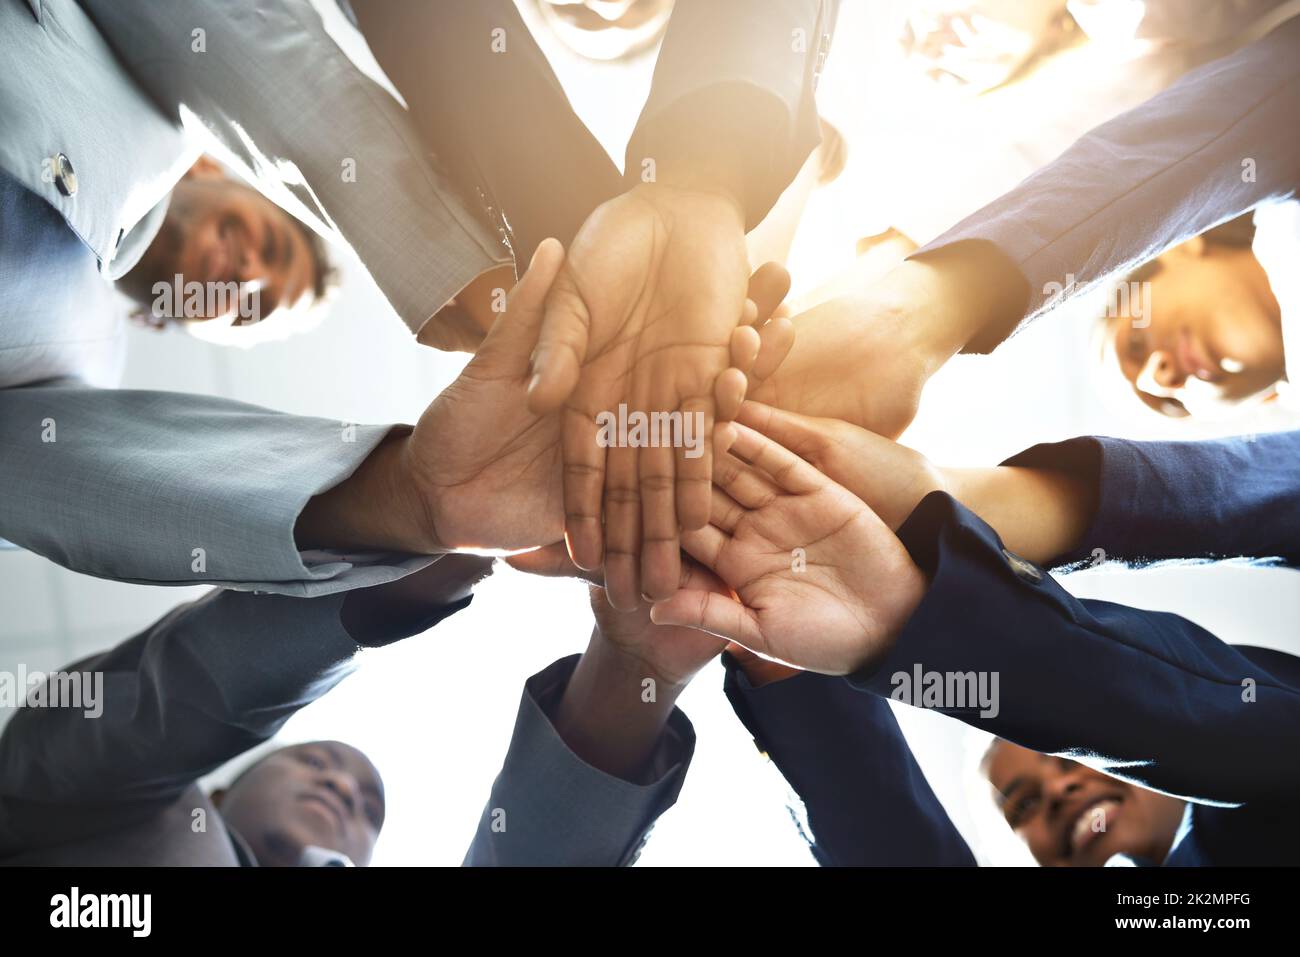 Teamwork on three. Low angle shot of a diverse group of businesspeople joining their hands together. Stock Photo